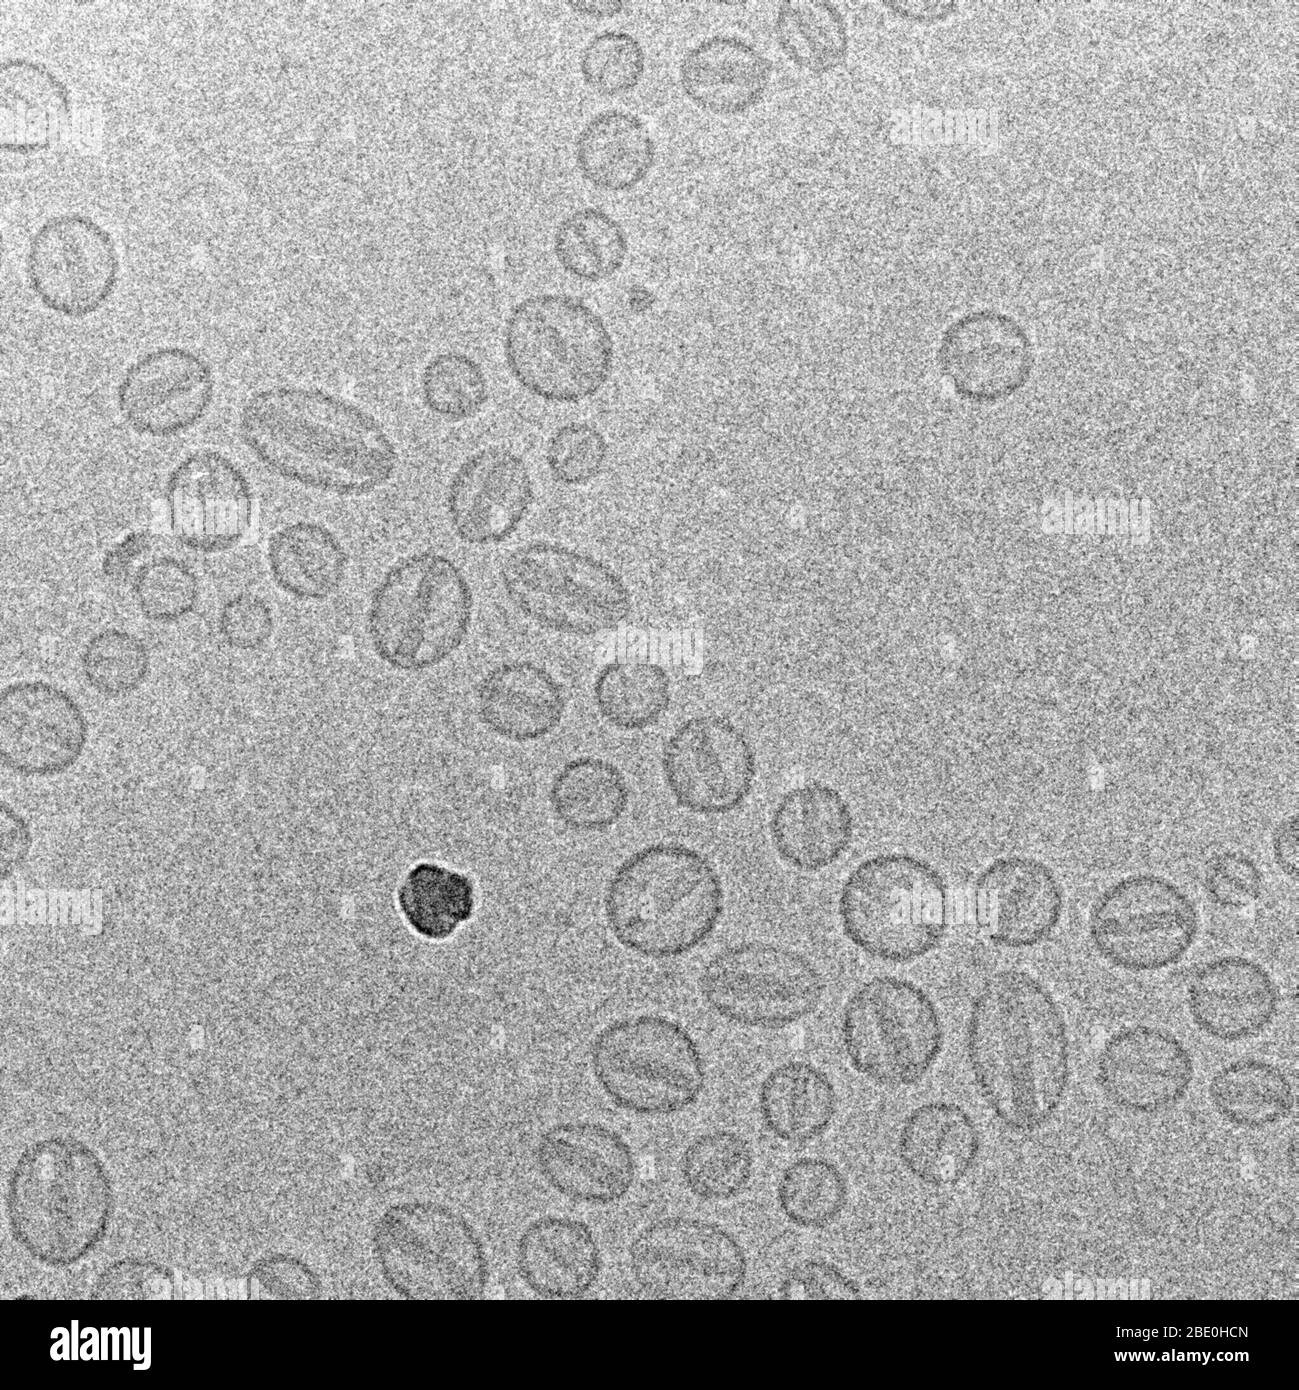 Transmission Electron Micrograph (TEM) of the chemotherapy drug Doxorubicin encapsulated in liposome, trade name Doxil. Magnification unknown. Stock Photo